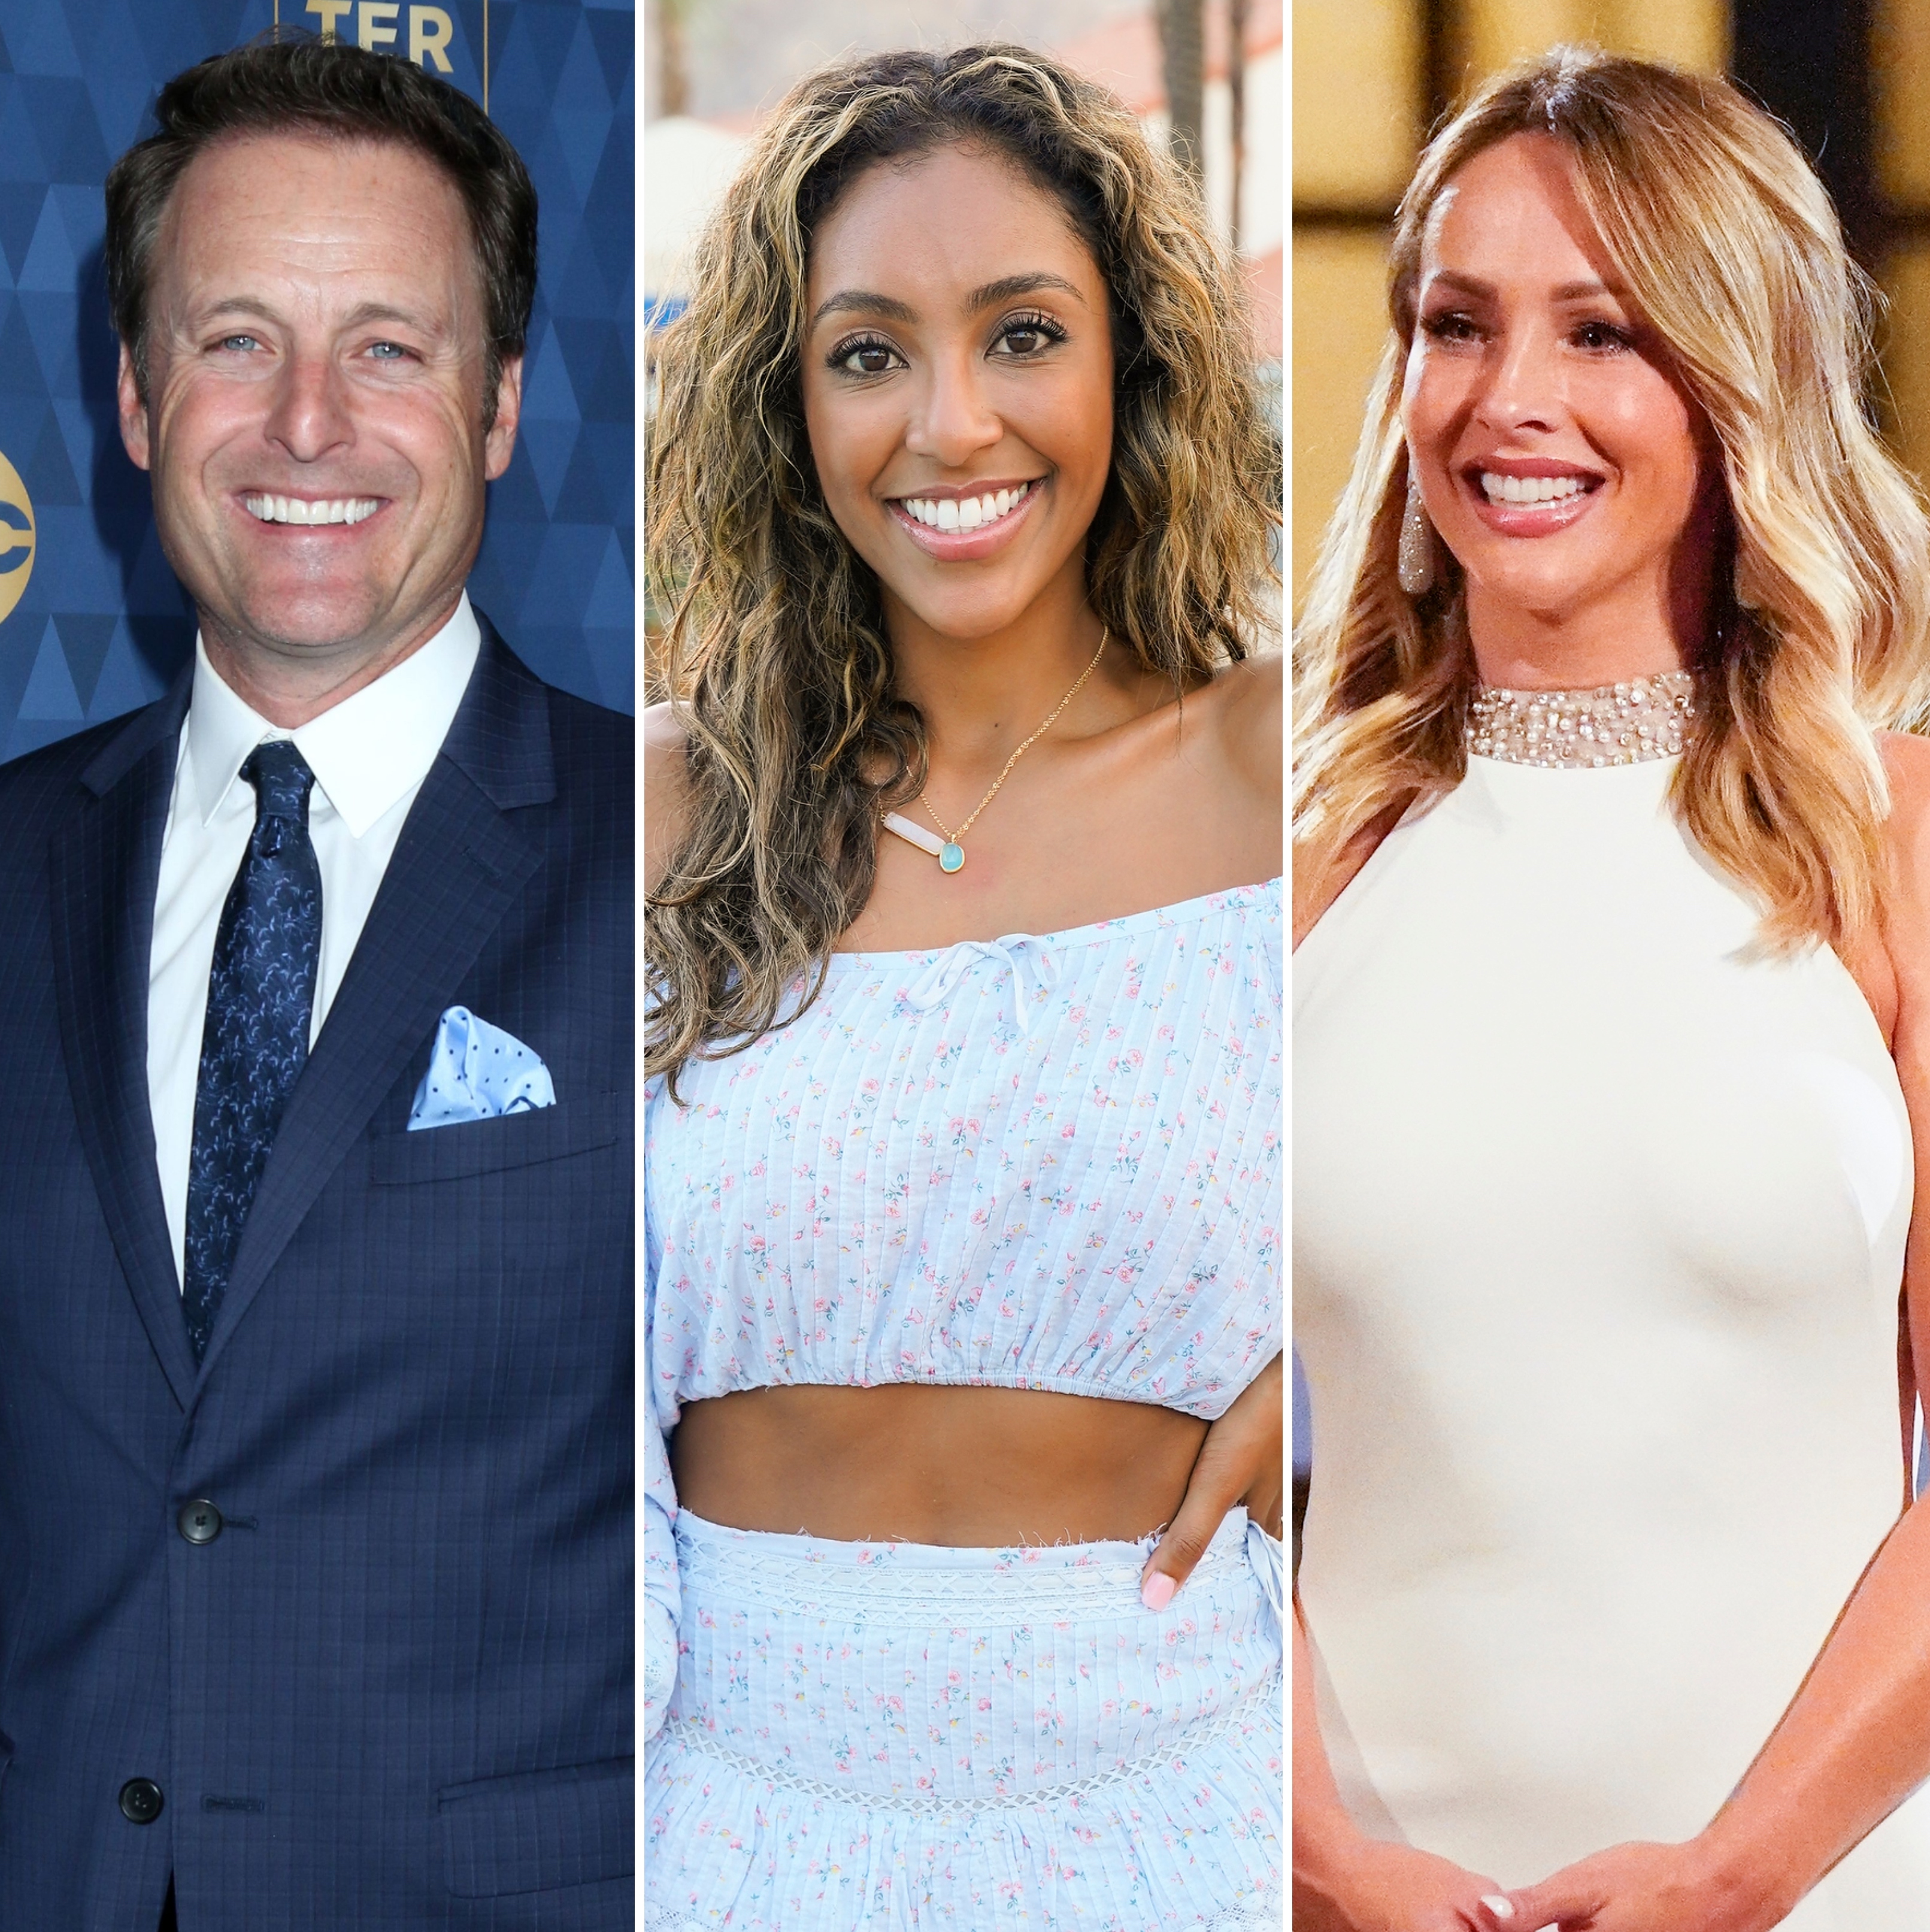 Chris Harrison Says There Was No Backup Bachelorette for Clare